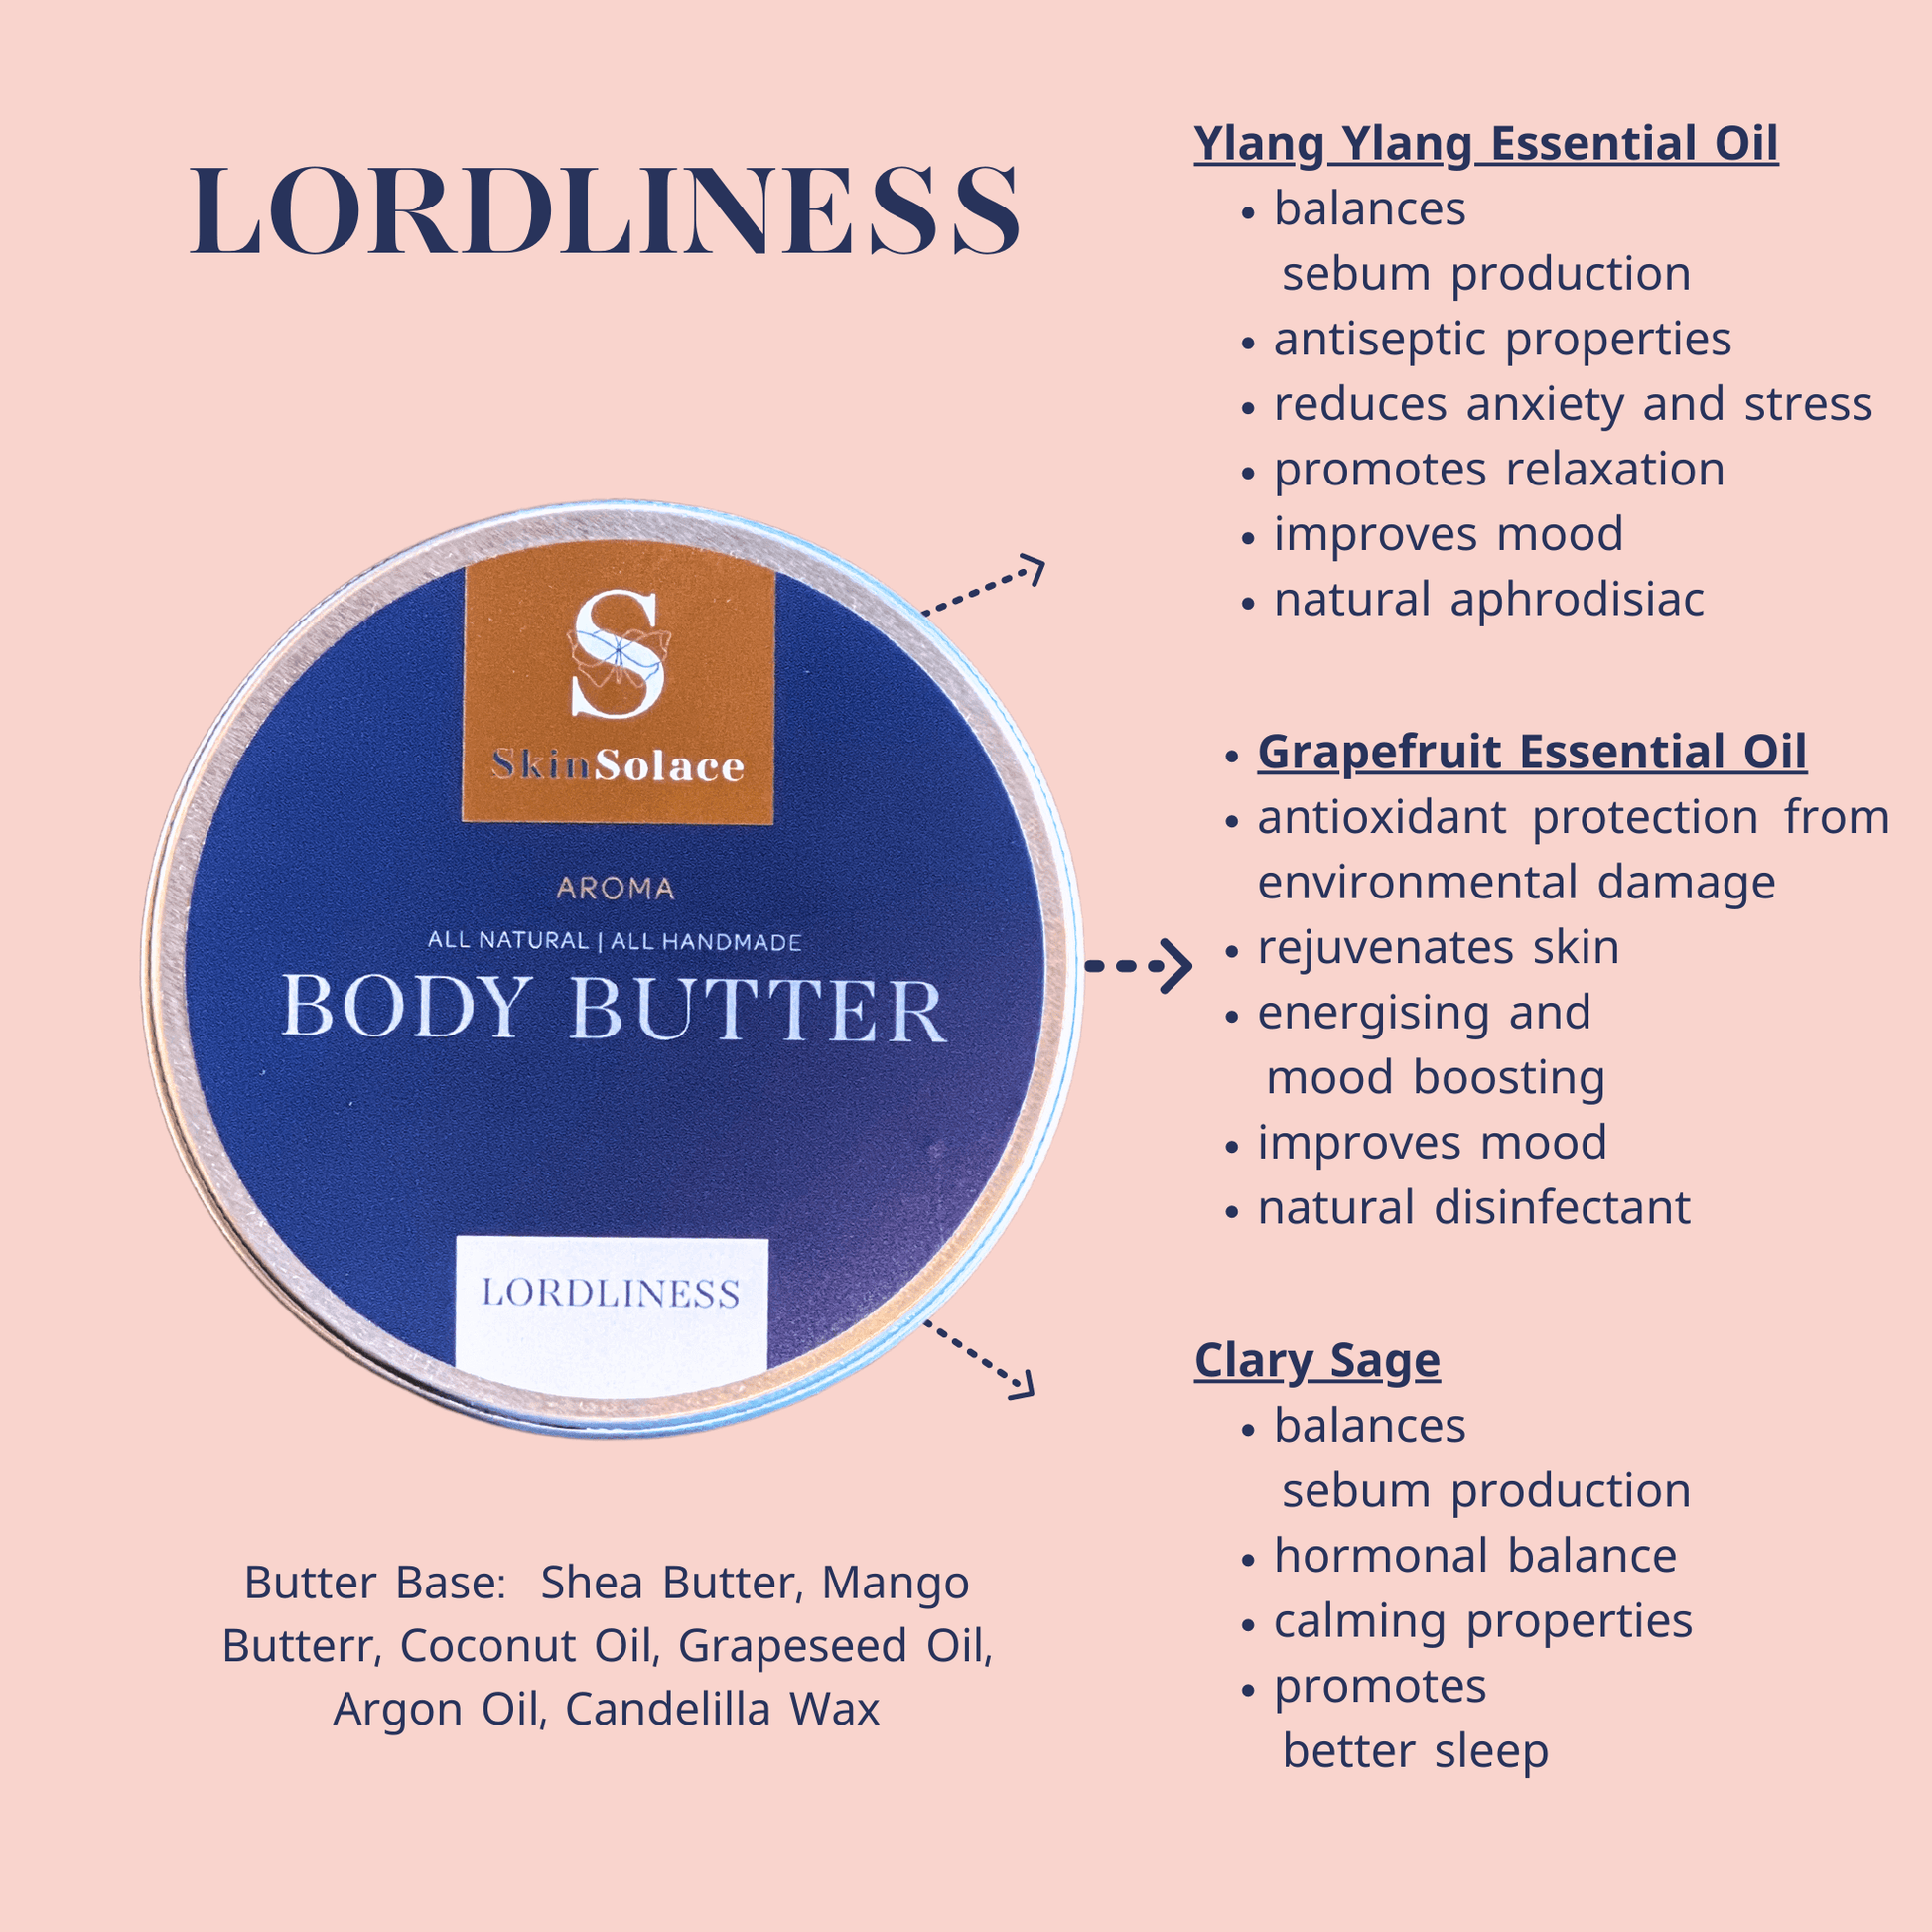 Lordliness Body Butter,Levity Aroma Soap,skin care products for dry skin, skin care products for sensitive skin, teenage skin care products, best skin care products for oily skin, best skin care products for 70-year-old woman, good skin care products for oily skin, oily skin care products skin, skin care products, best baby skin care products, face care products for oily skin,